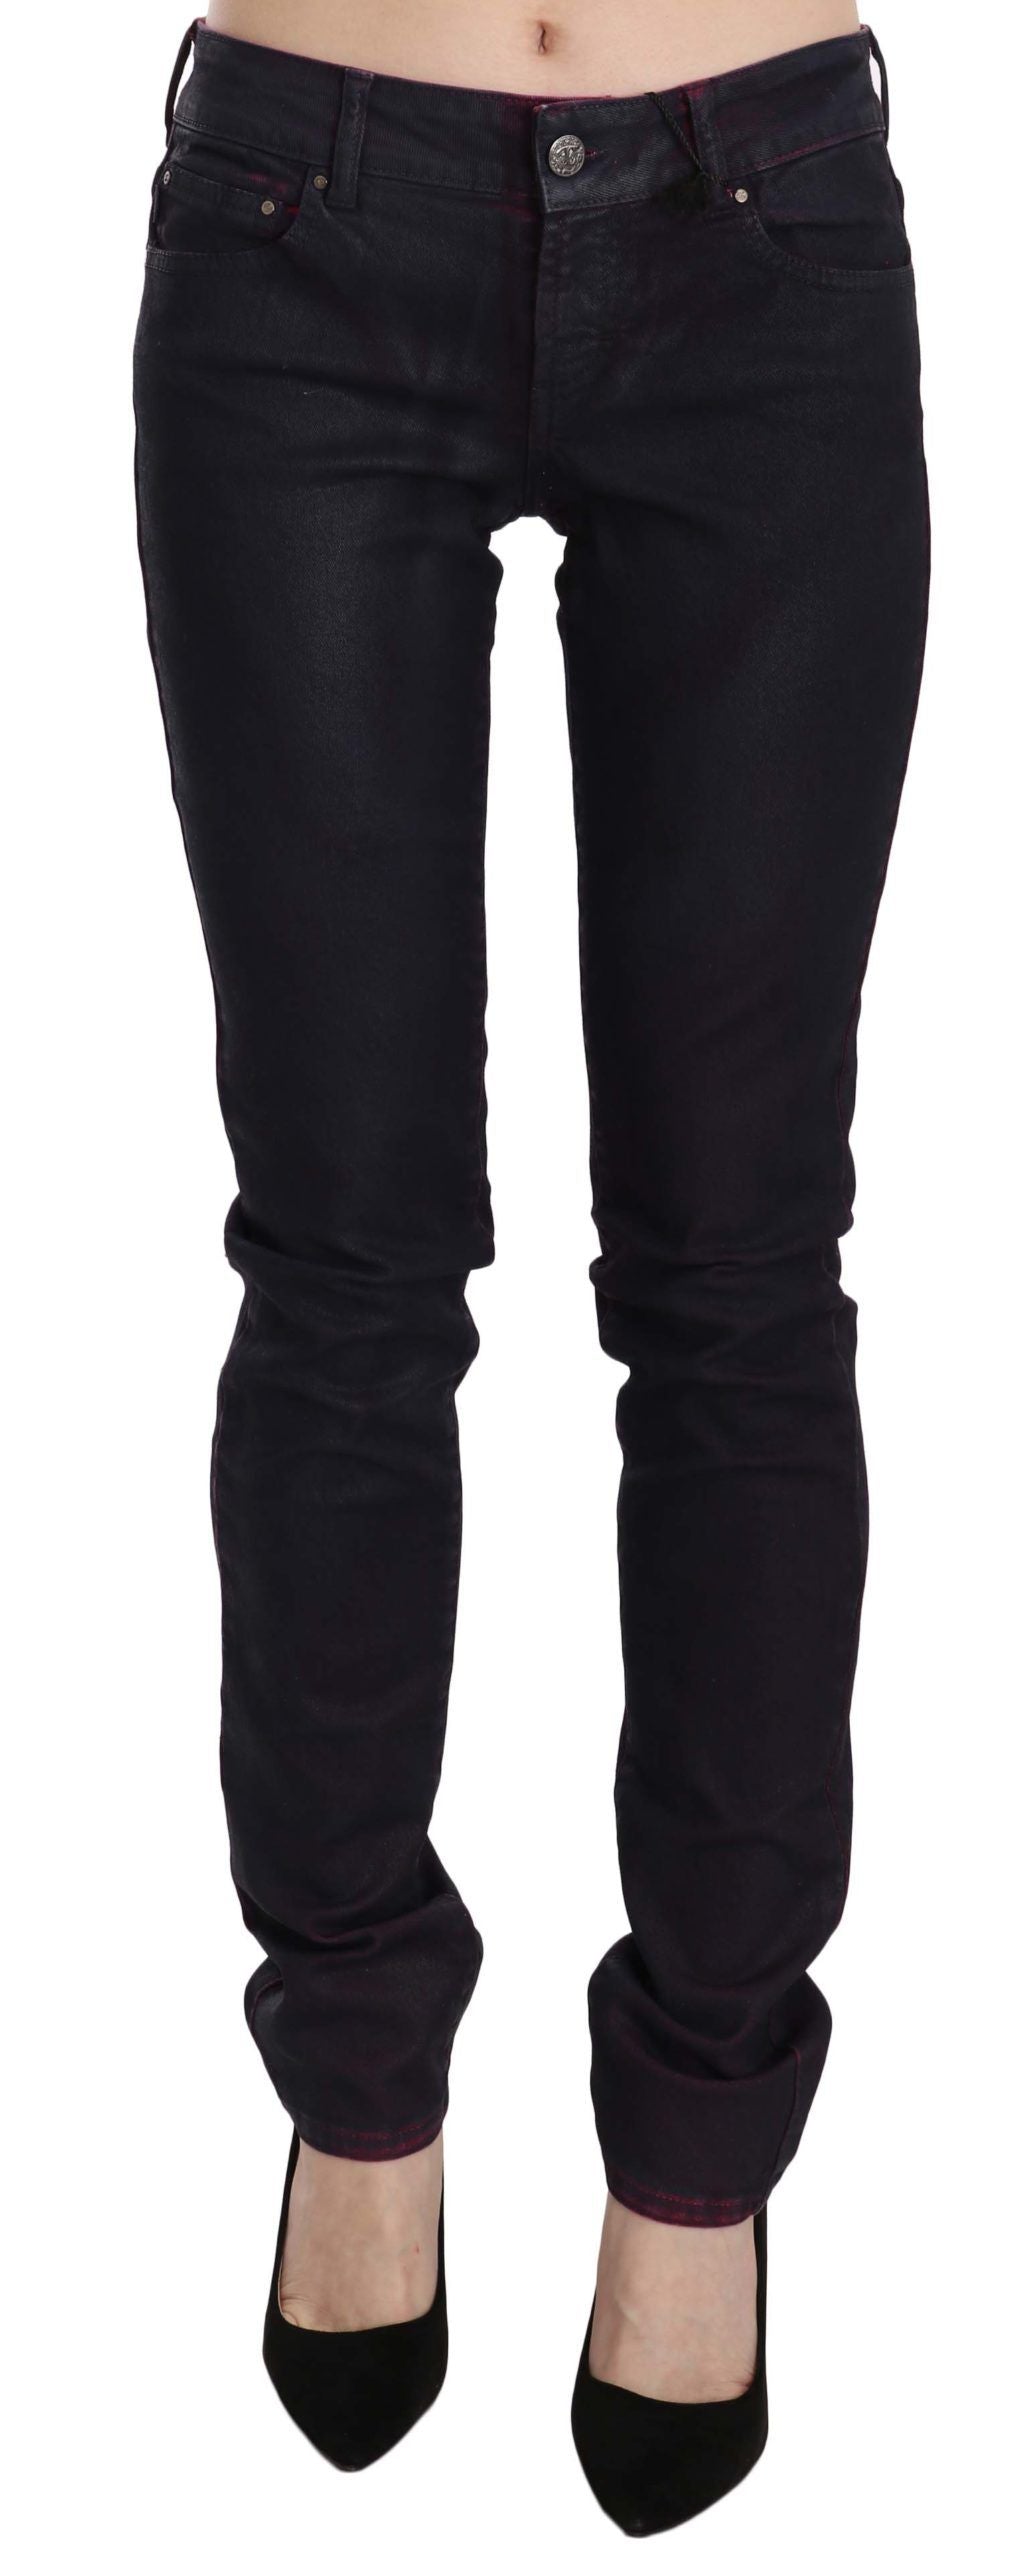 Black Cotton Low Waist Skinny Denim Pants - Designed by Just Cavalli Available to Buy at a Discounted Price on Moon Behind The Hill Online Designer Discount Store